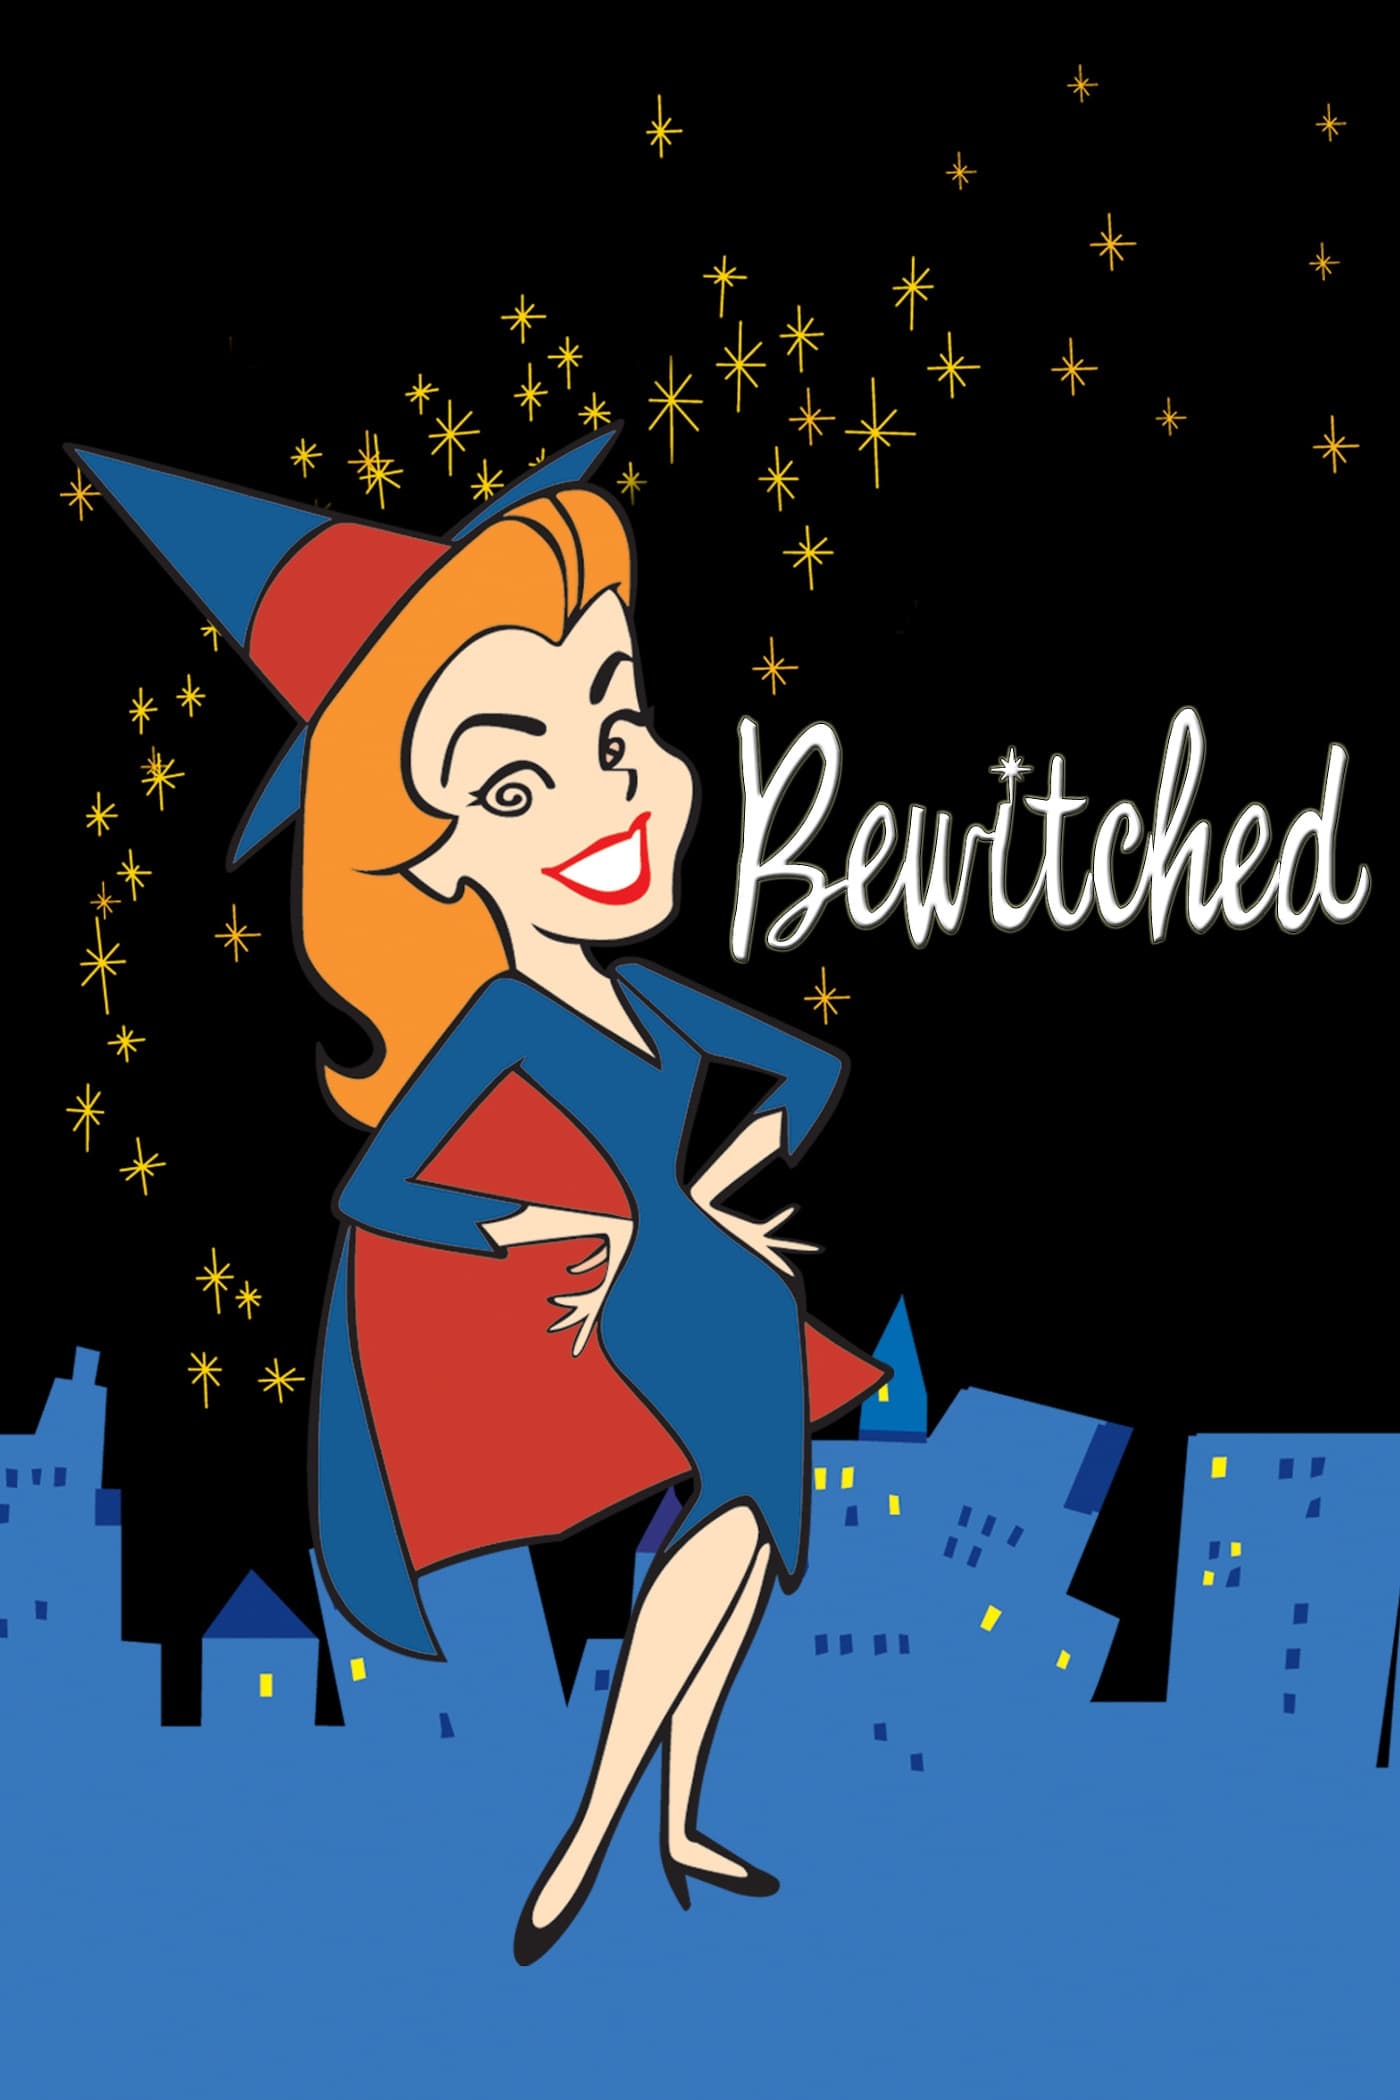 Bewitched (1964)